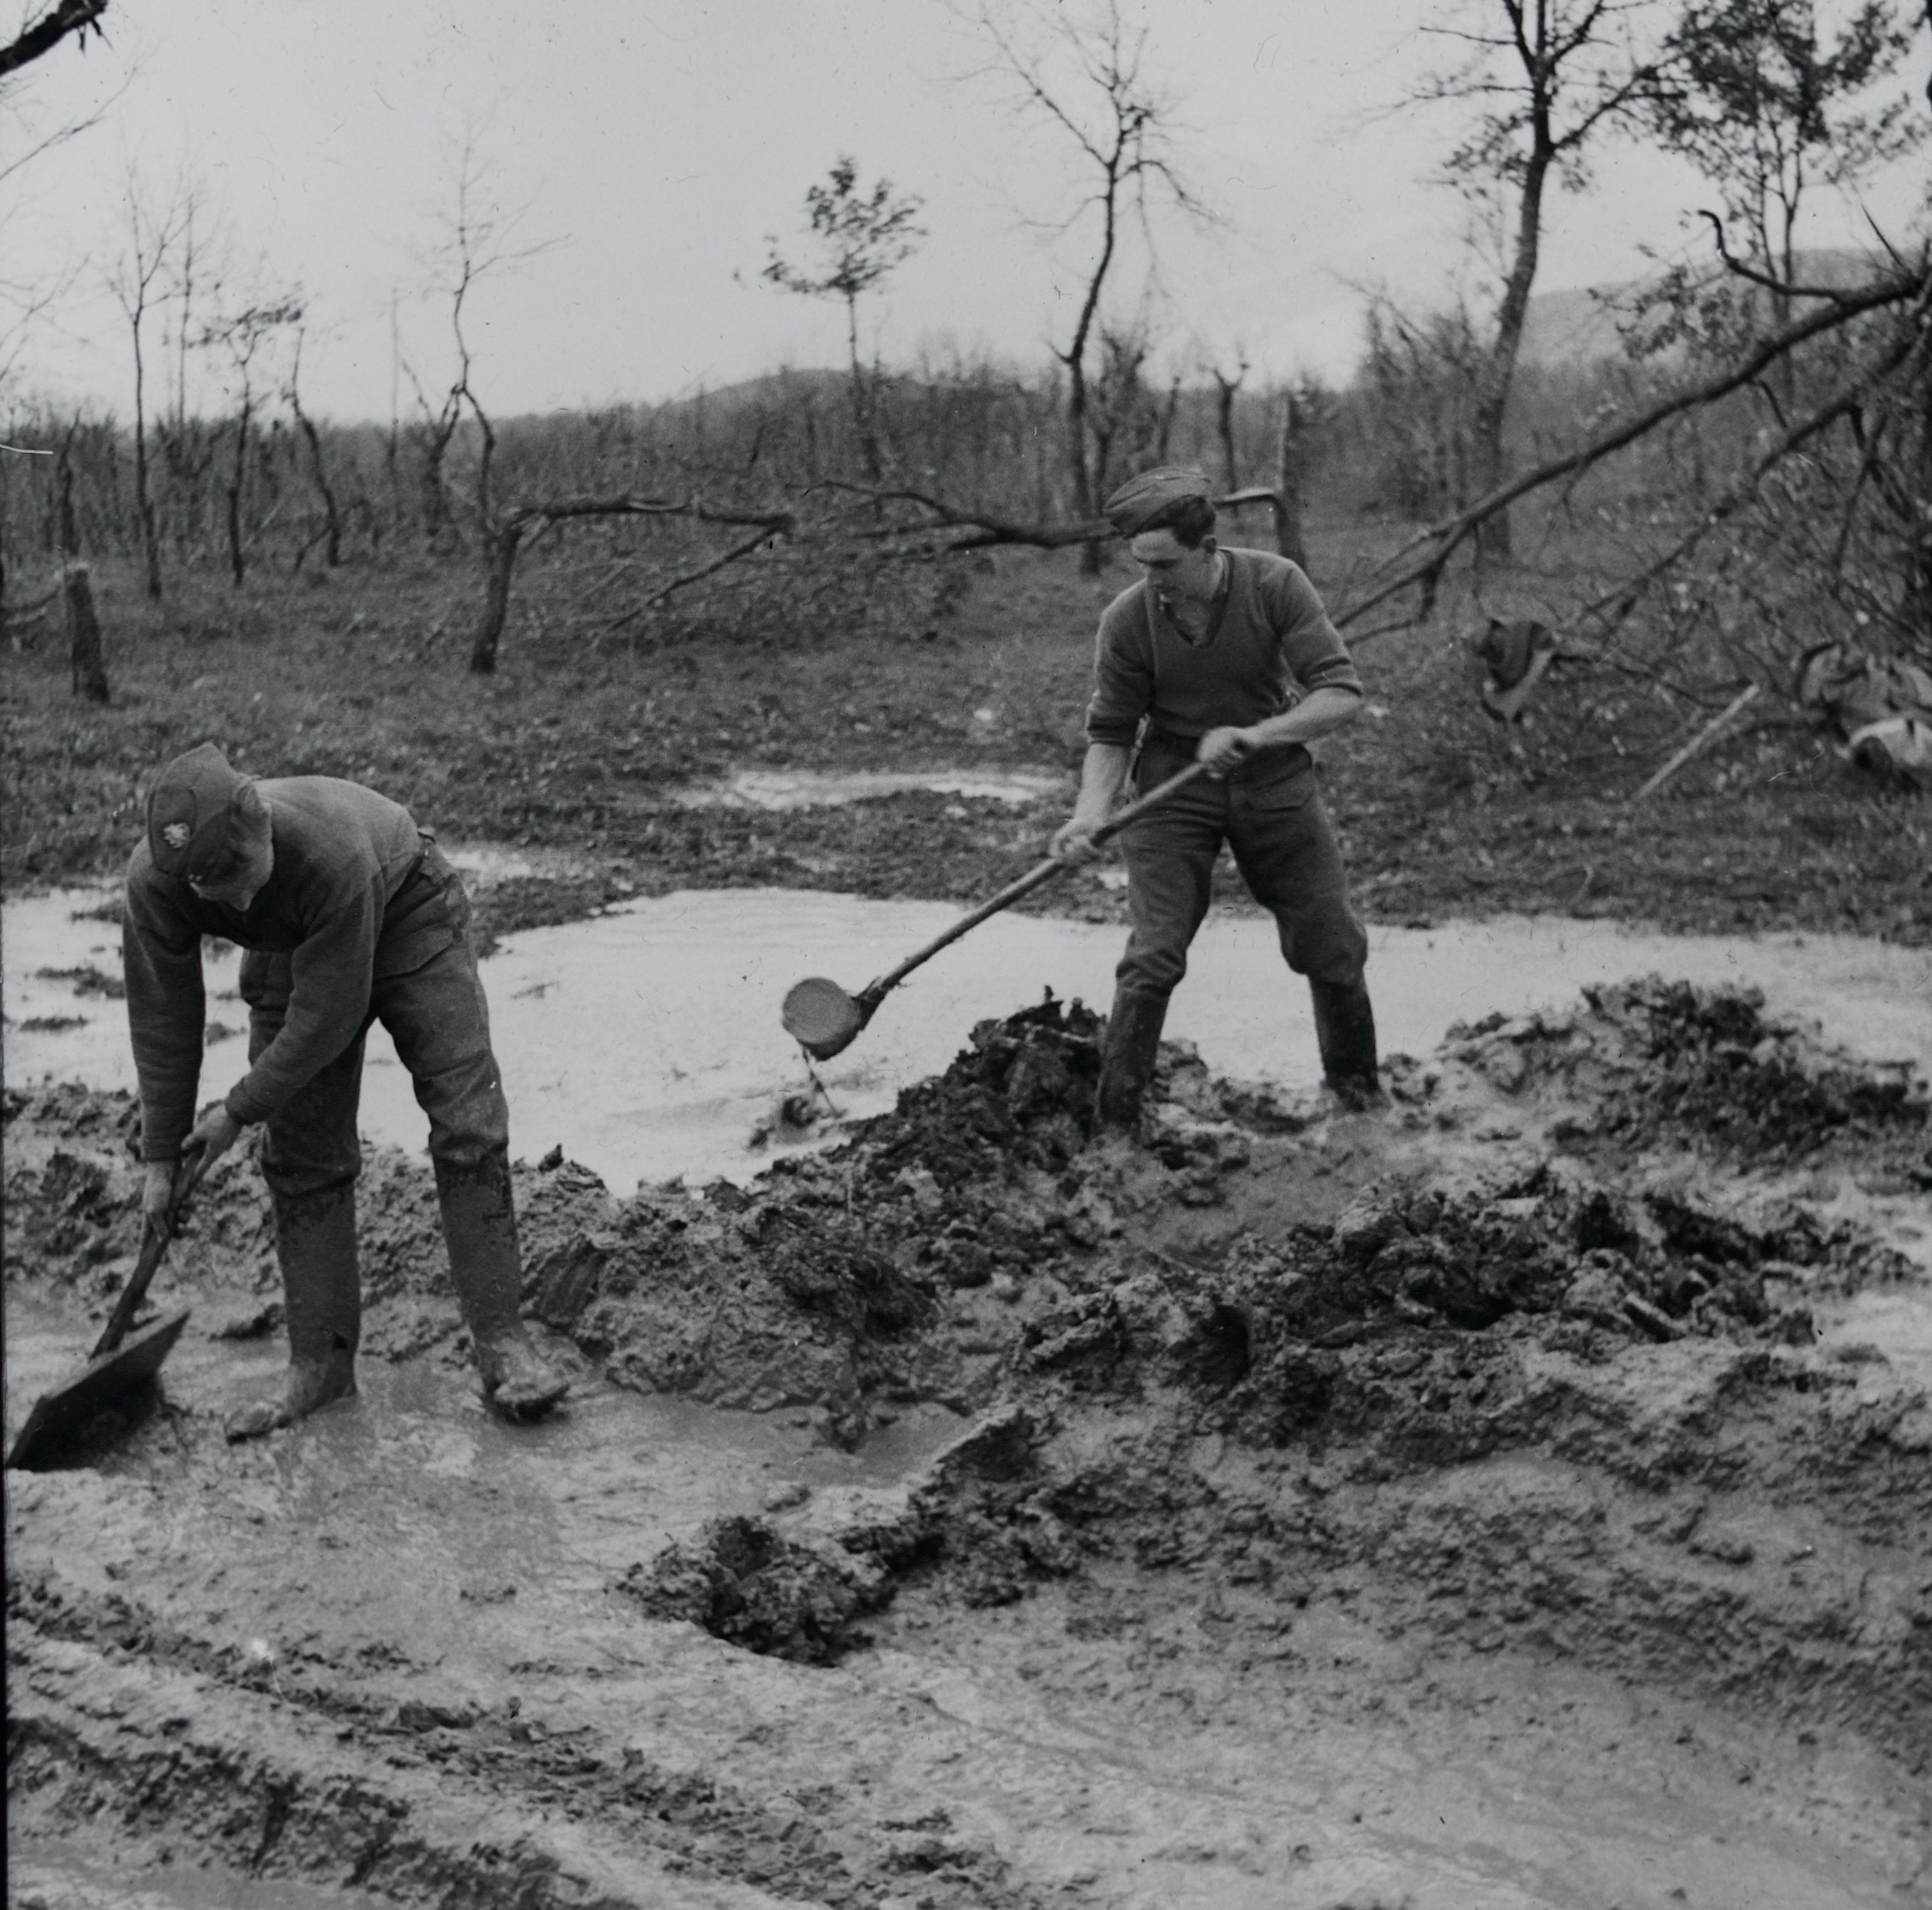 Clearing mud from the 1st East Surrey Regiment's position on the Rapido River, March 1944